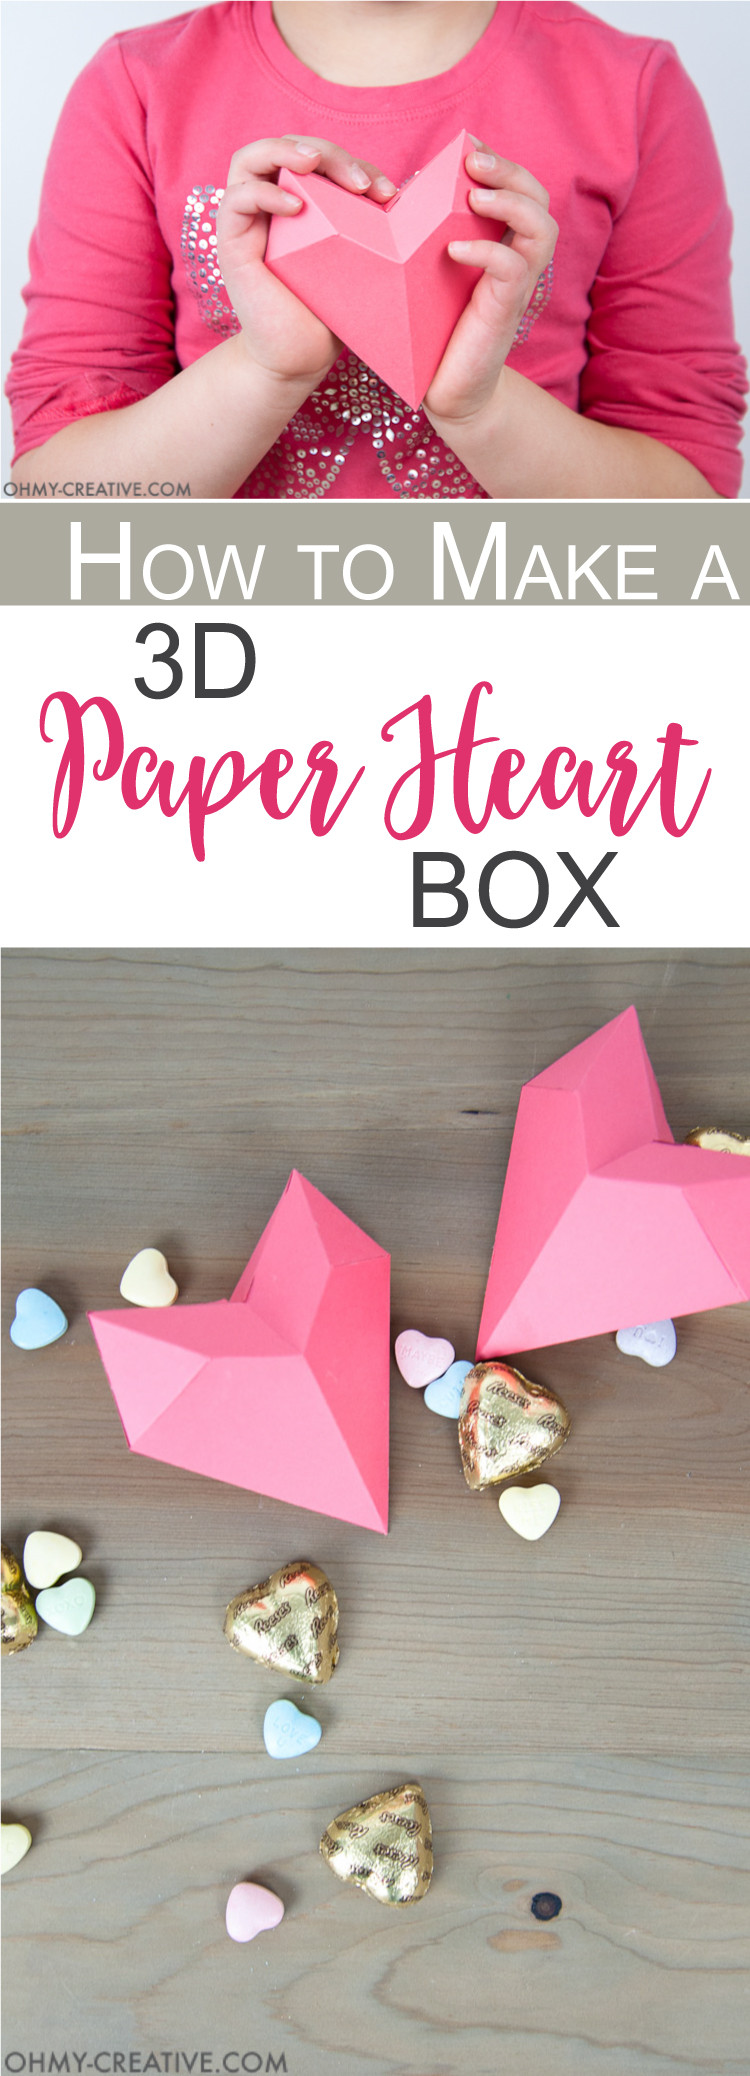 Valentine Gift Box Ideas
 How to Make a 3D Paper Heart Box Oh My Creative